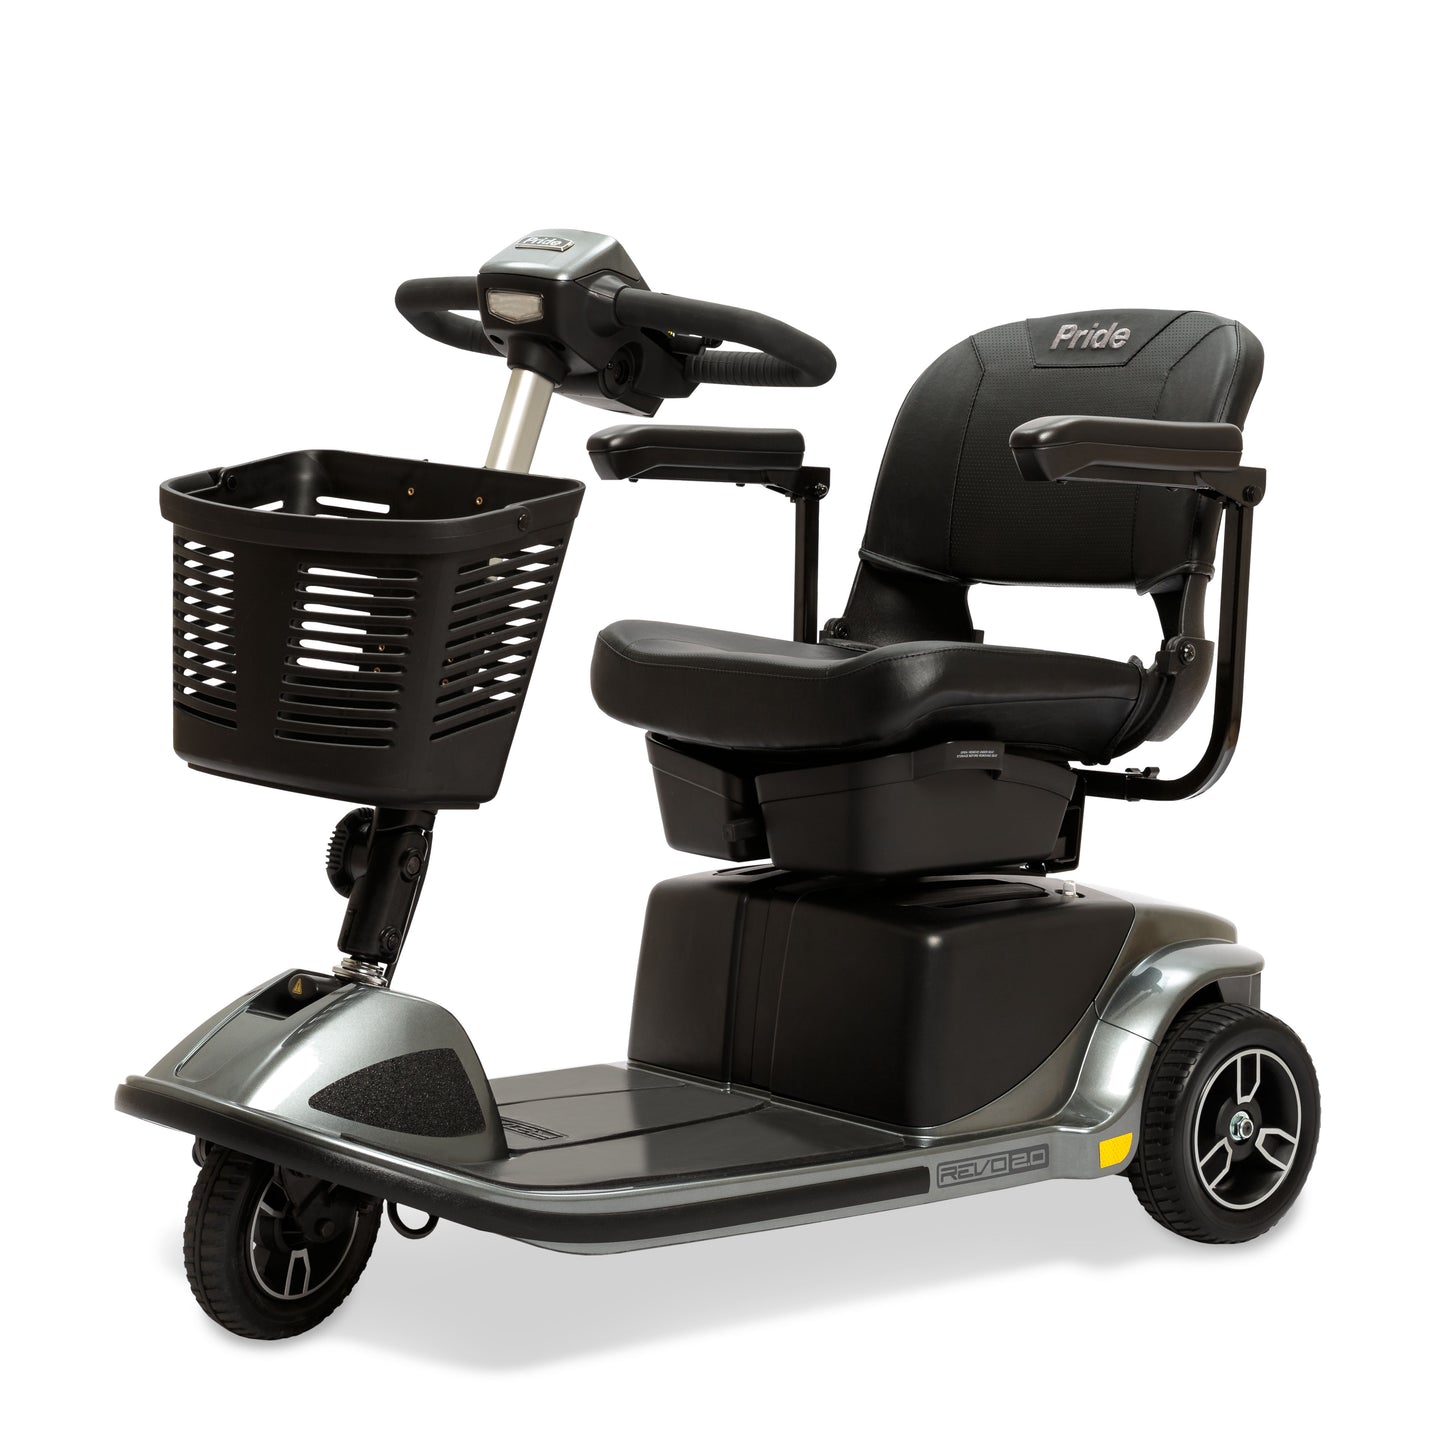 Revo 2.0 3 Wheel S66 Mobility Scooter